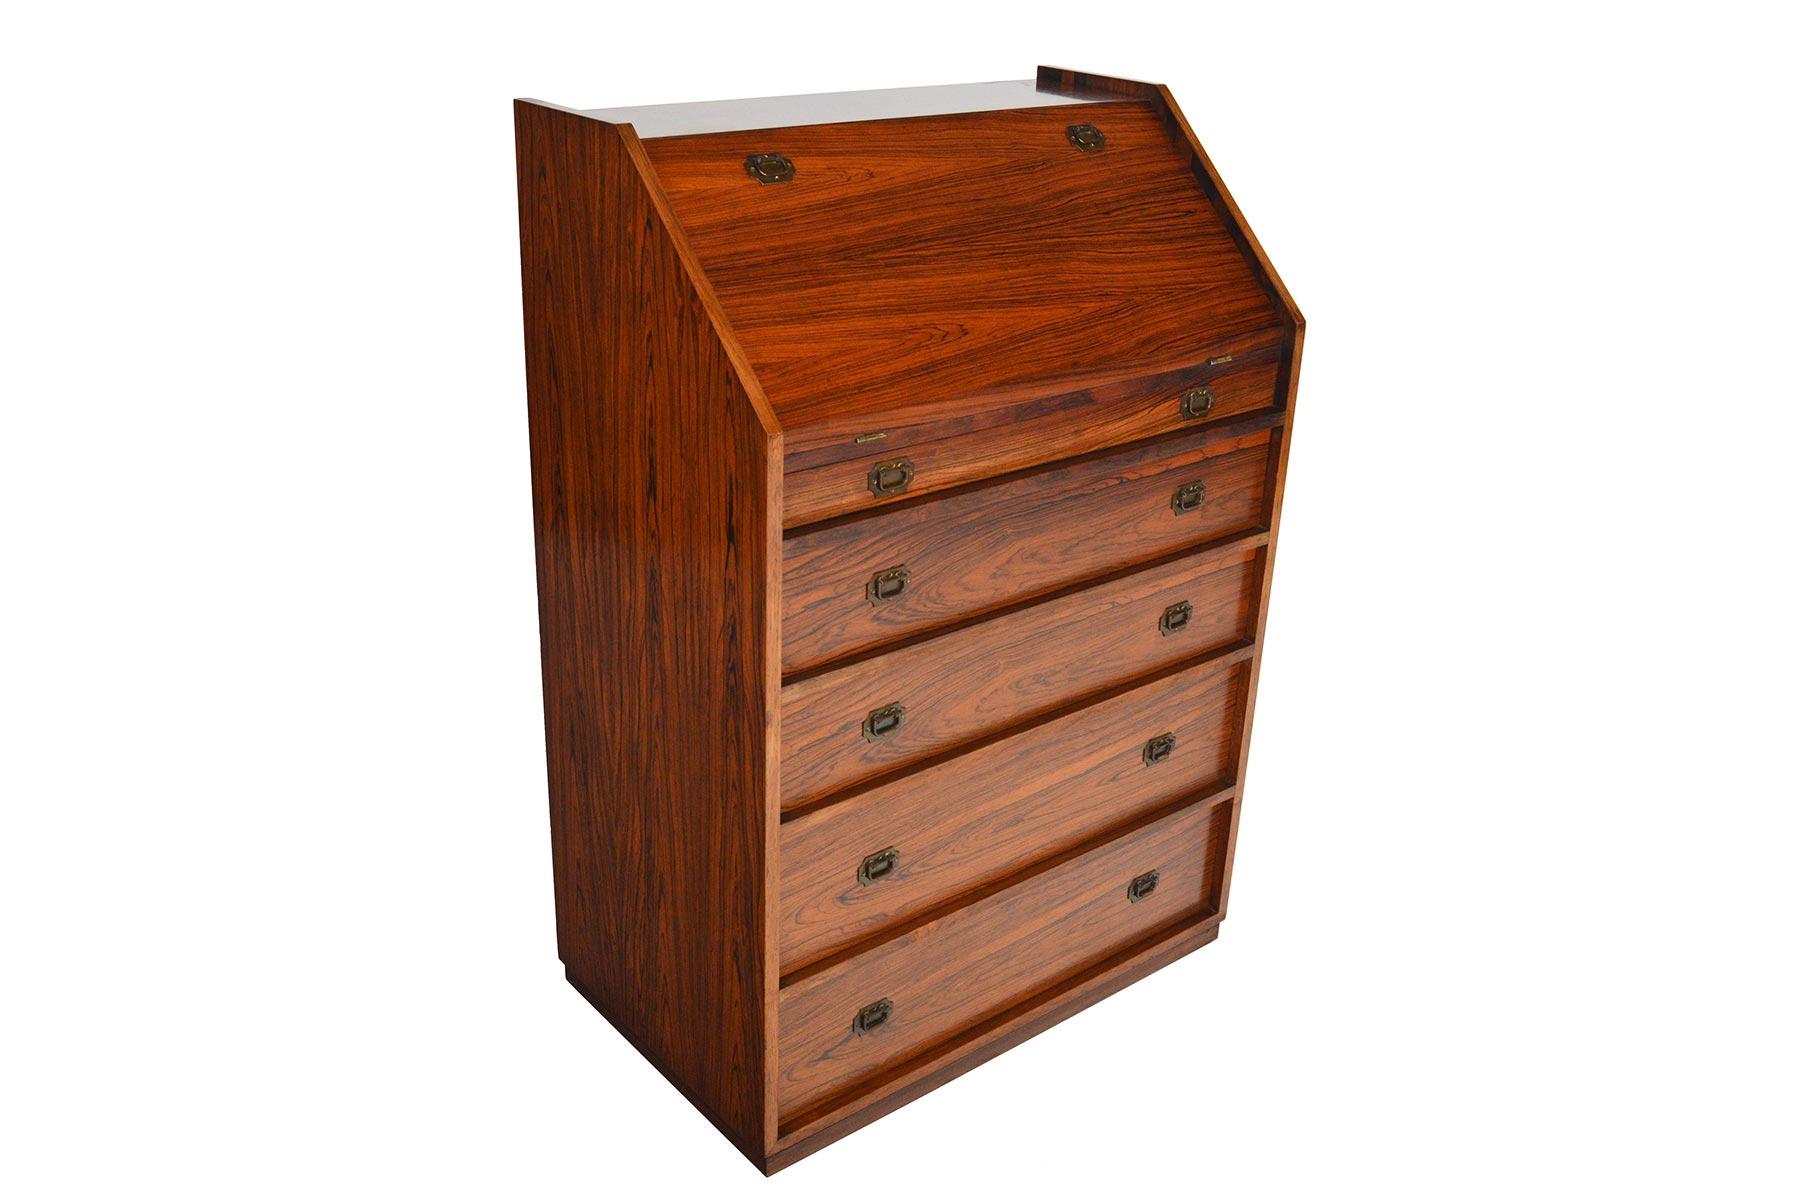 Compact and with concise details, this campaign secretary was designed by Henning Korch for CFC Silkeborg. Crafted in Brazilian rosewood, the large door drops to reveal a writing surface with four small drawers. Each drawer is adorned with brass